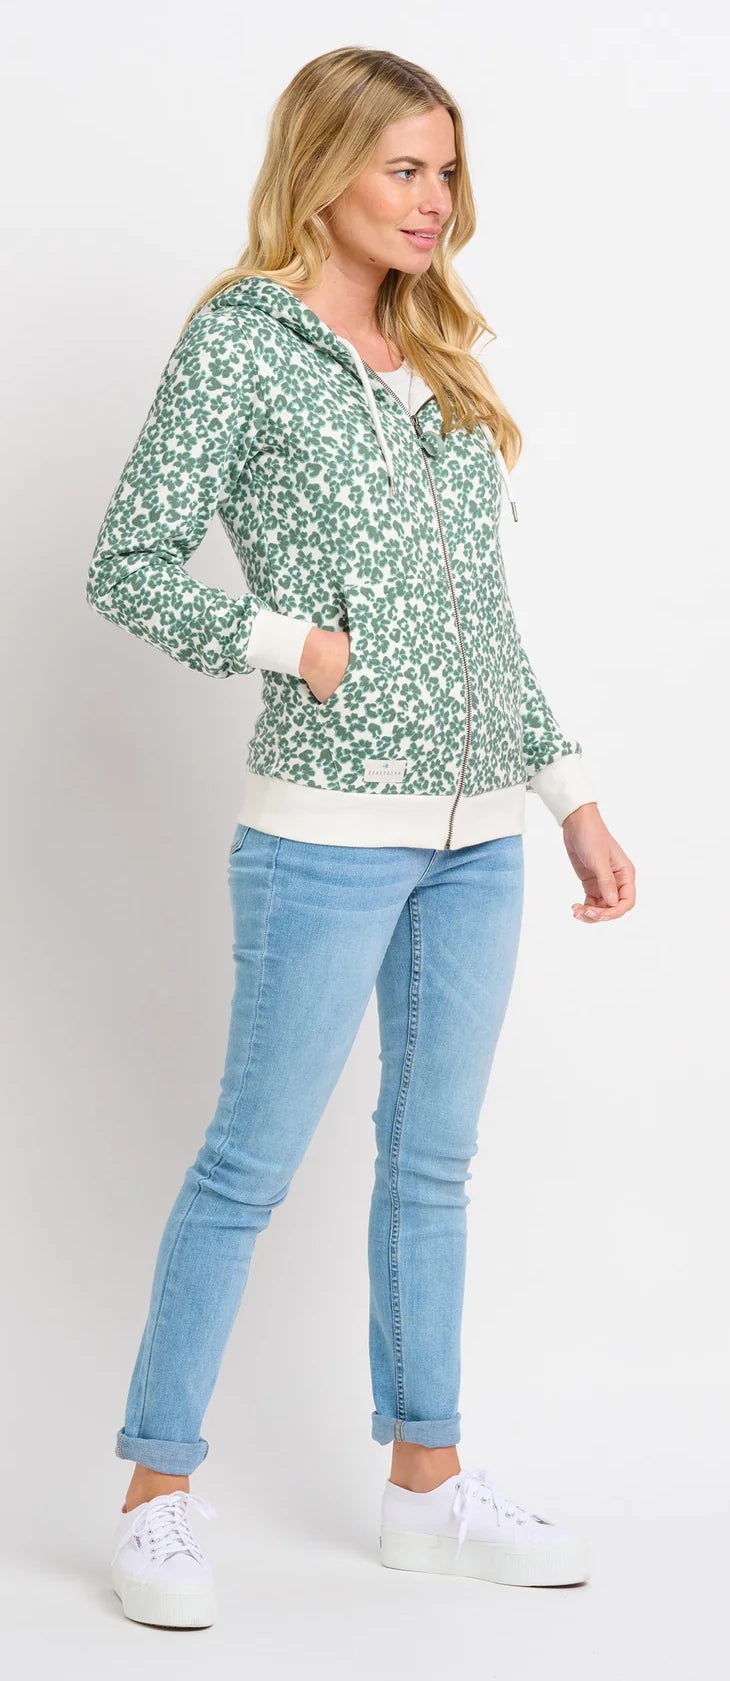 Women's zip through style hoody with a unique leopard floral print from Brakeburn in khaki green.